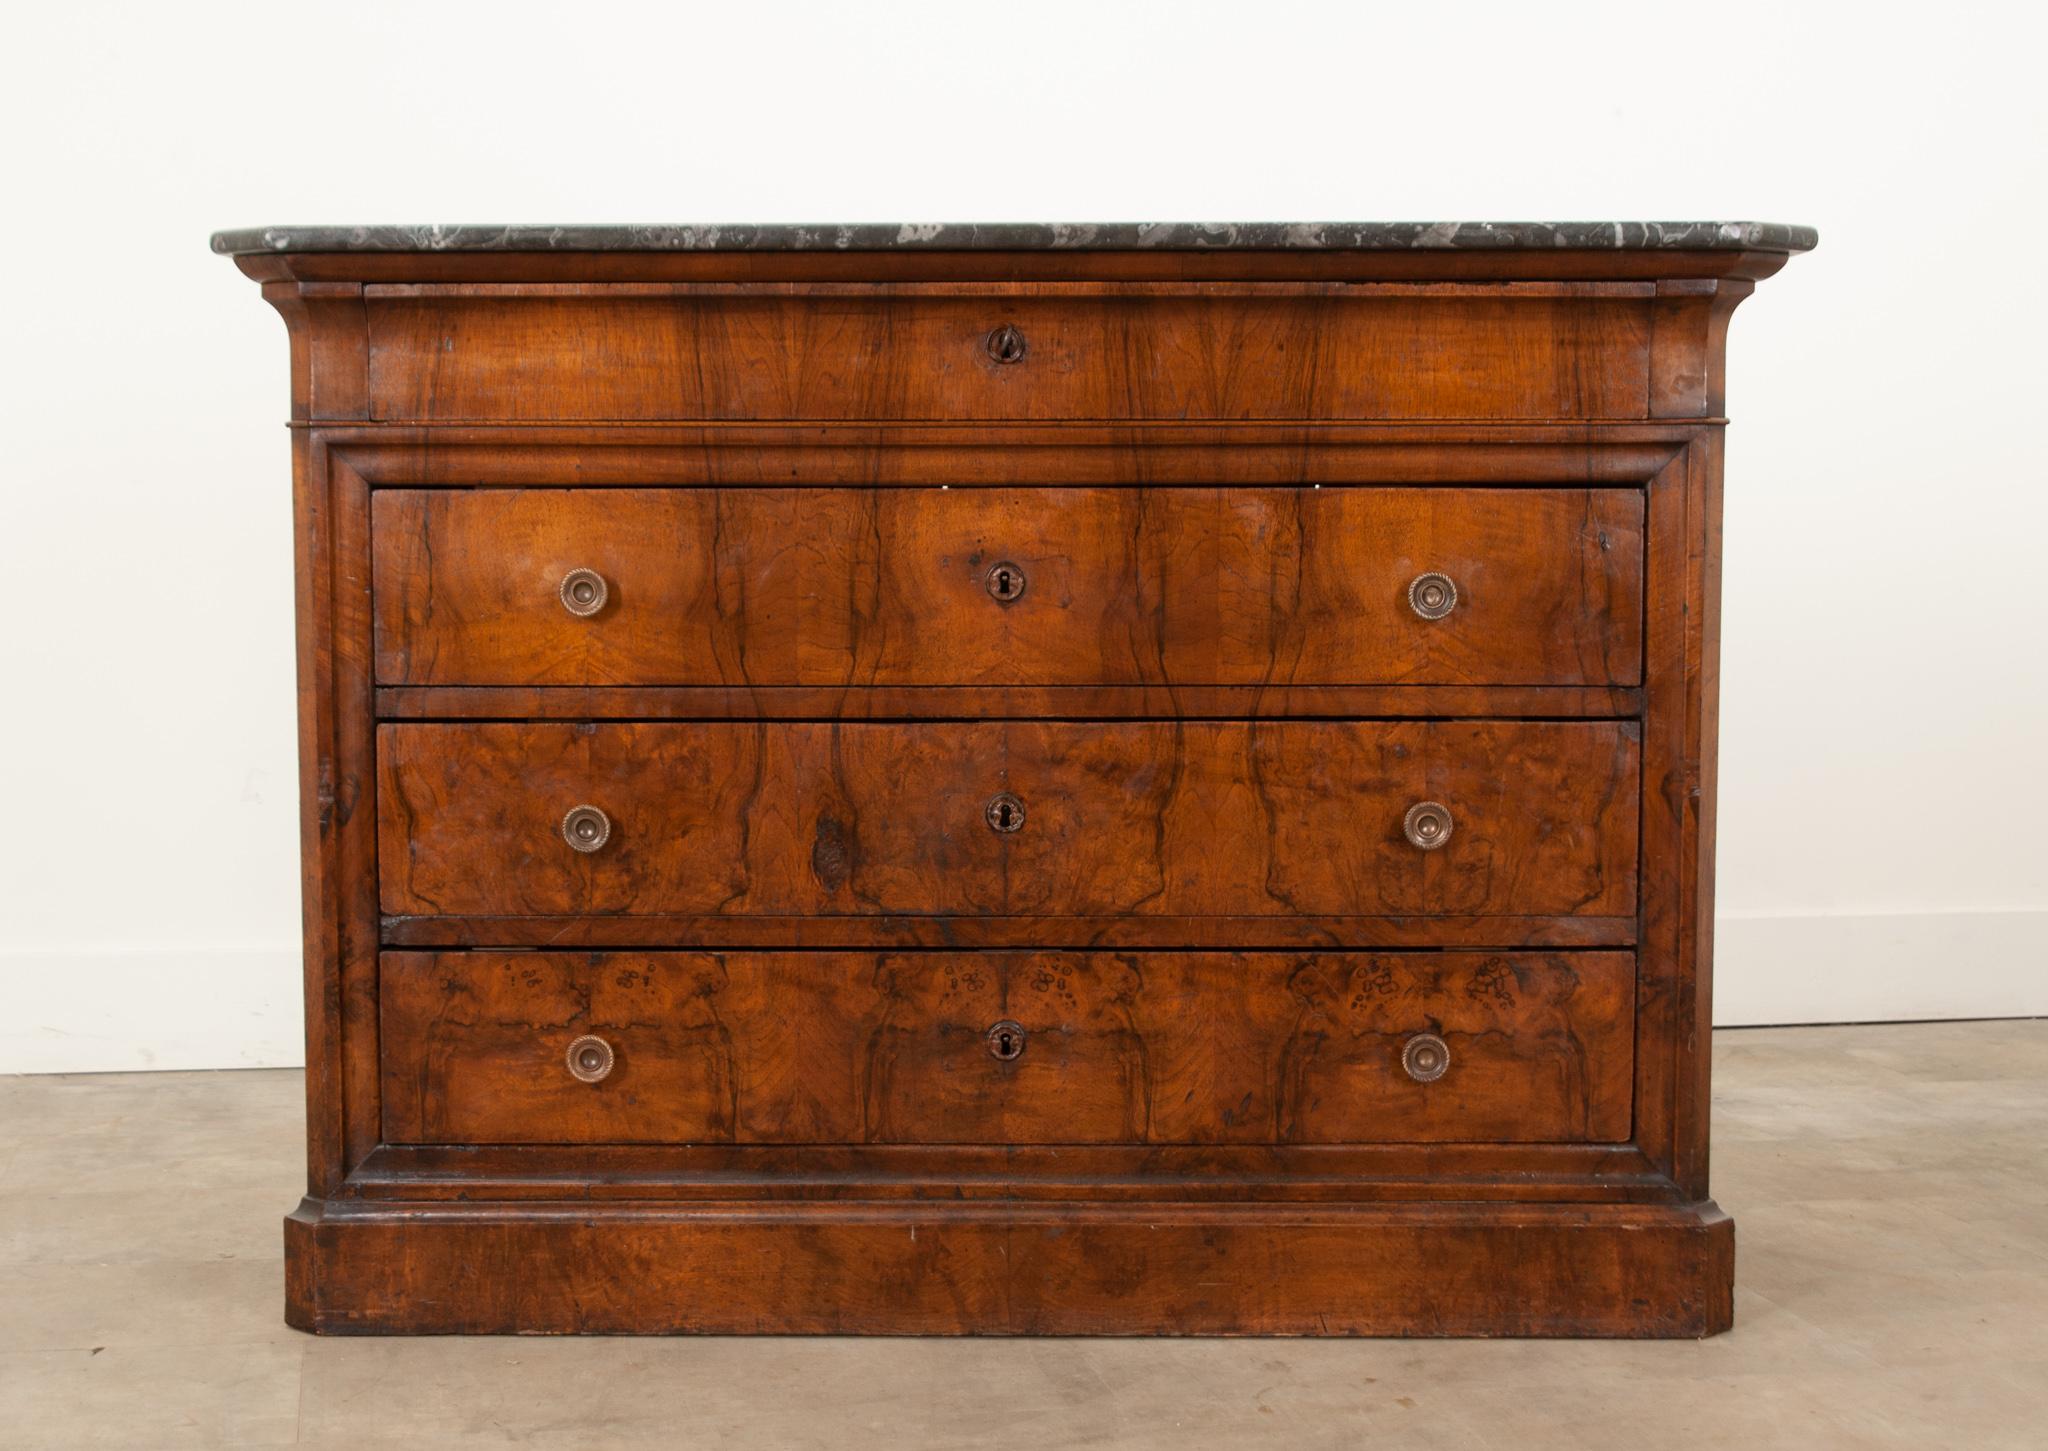 A beautiful 19th century French mahogany Louis Philippe style commode, circa 1840. The original removable marble top is in superb antique condition and has canted corners shaped to match the base. The marble is gorgeous with dramatic charcoal, gray,